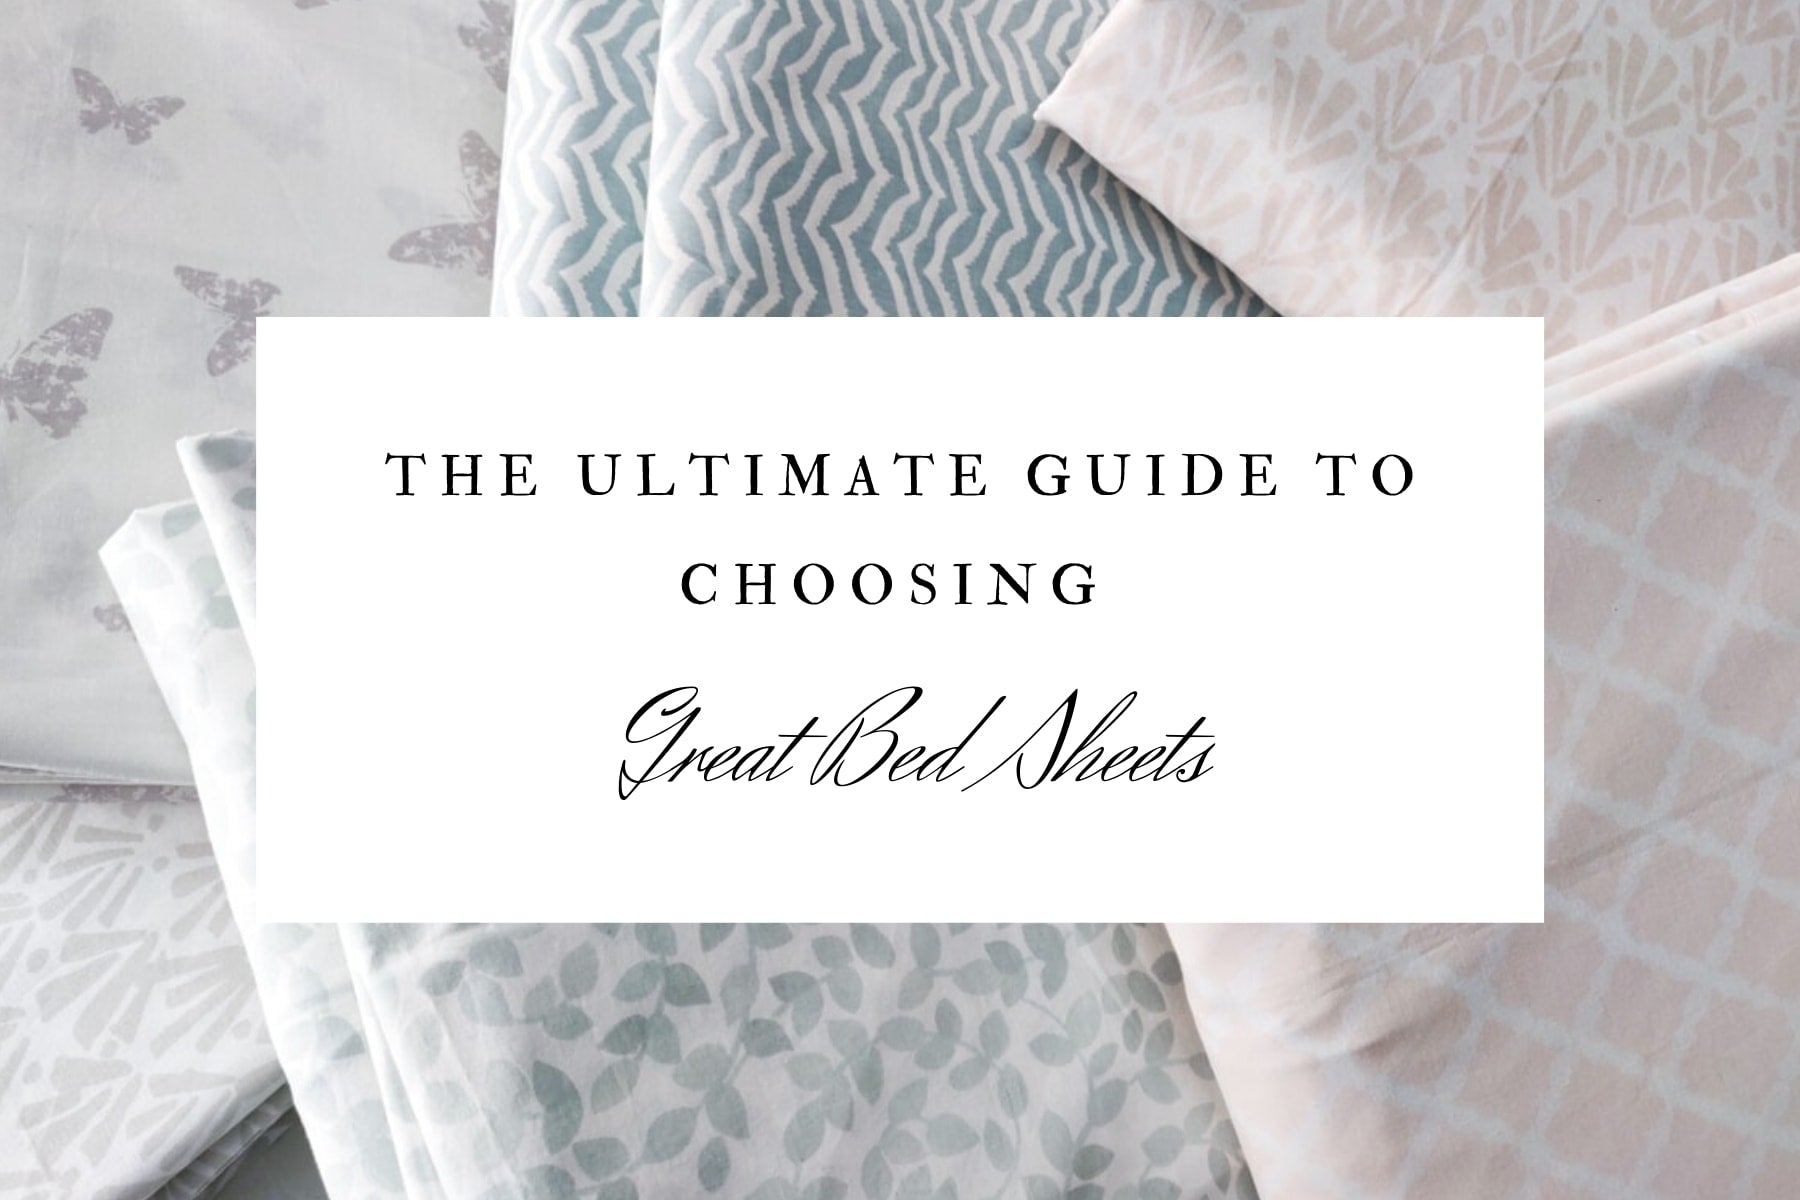 The Ultimate Guide to Choosing Great Bed Sheets